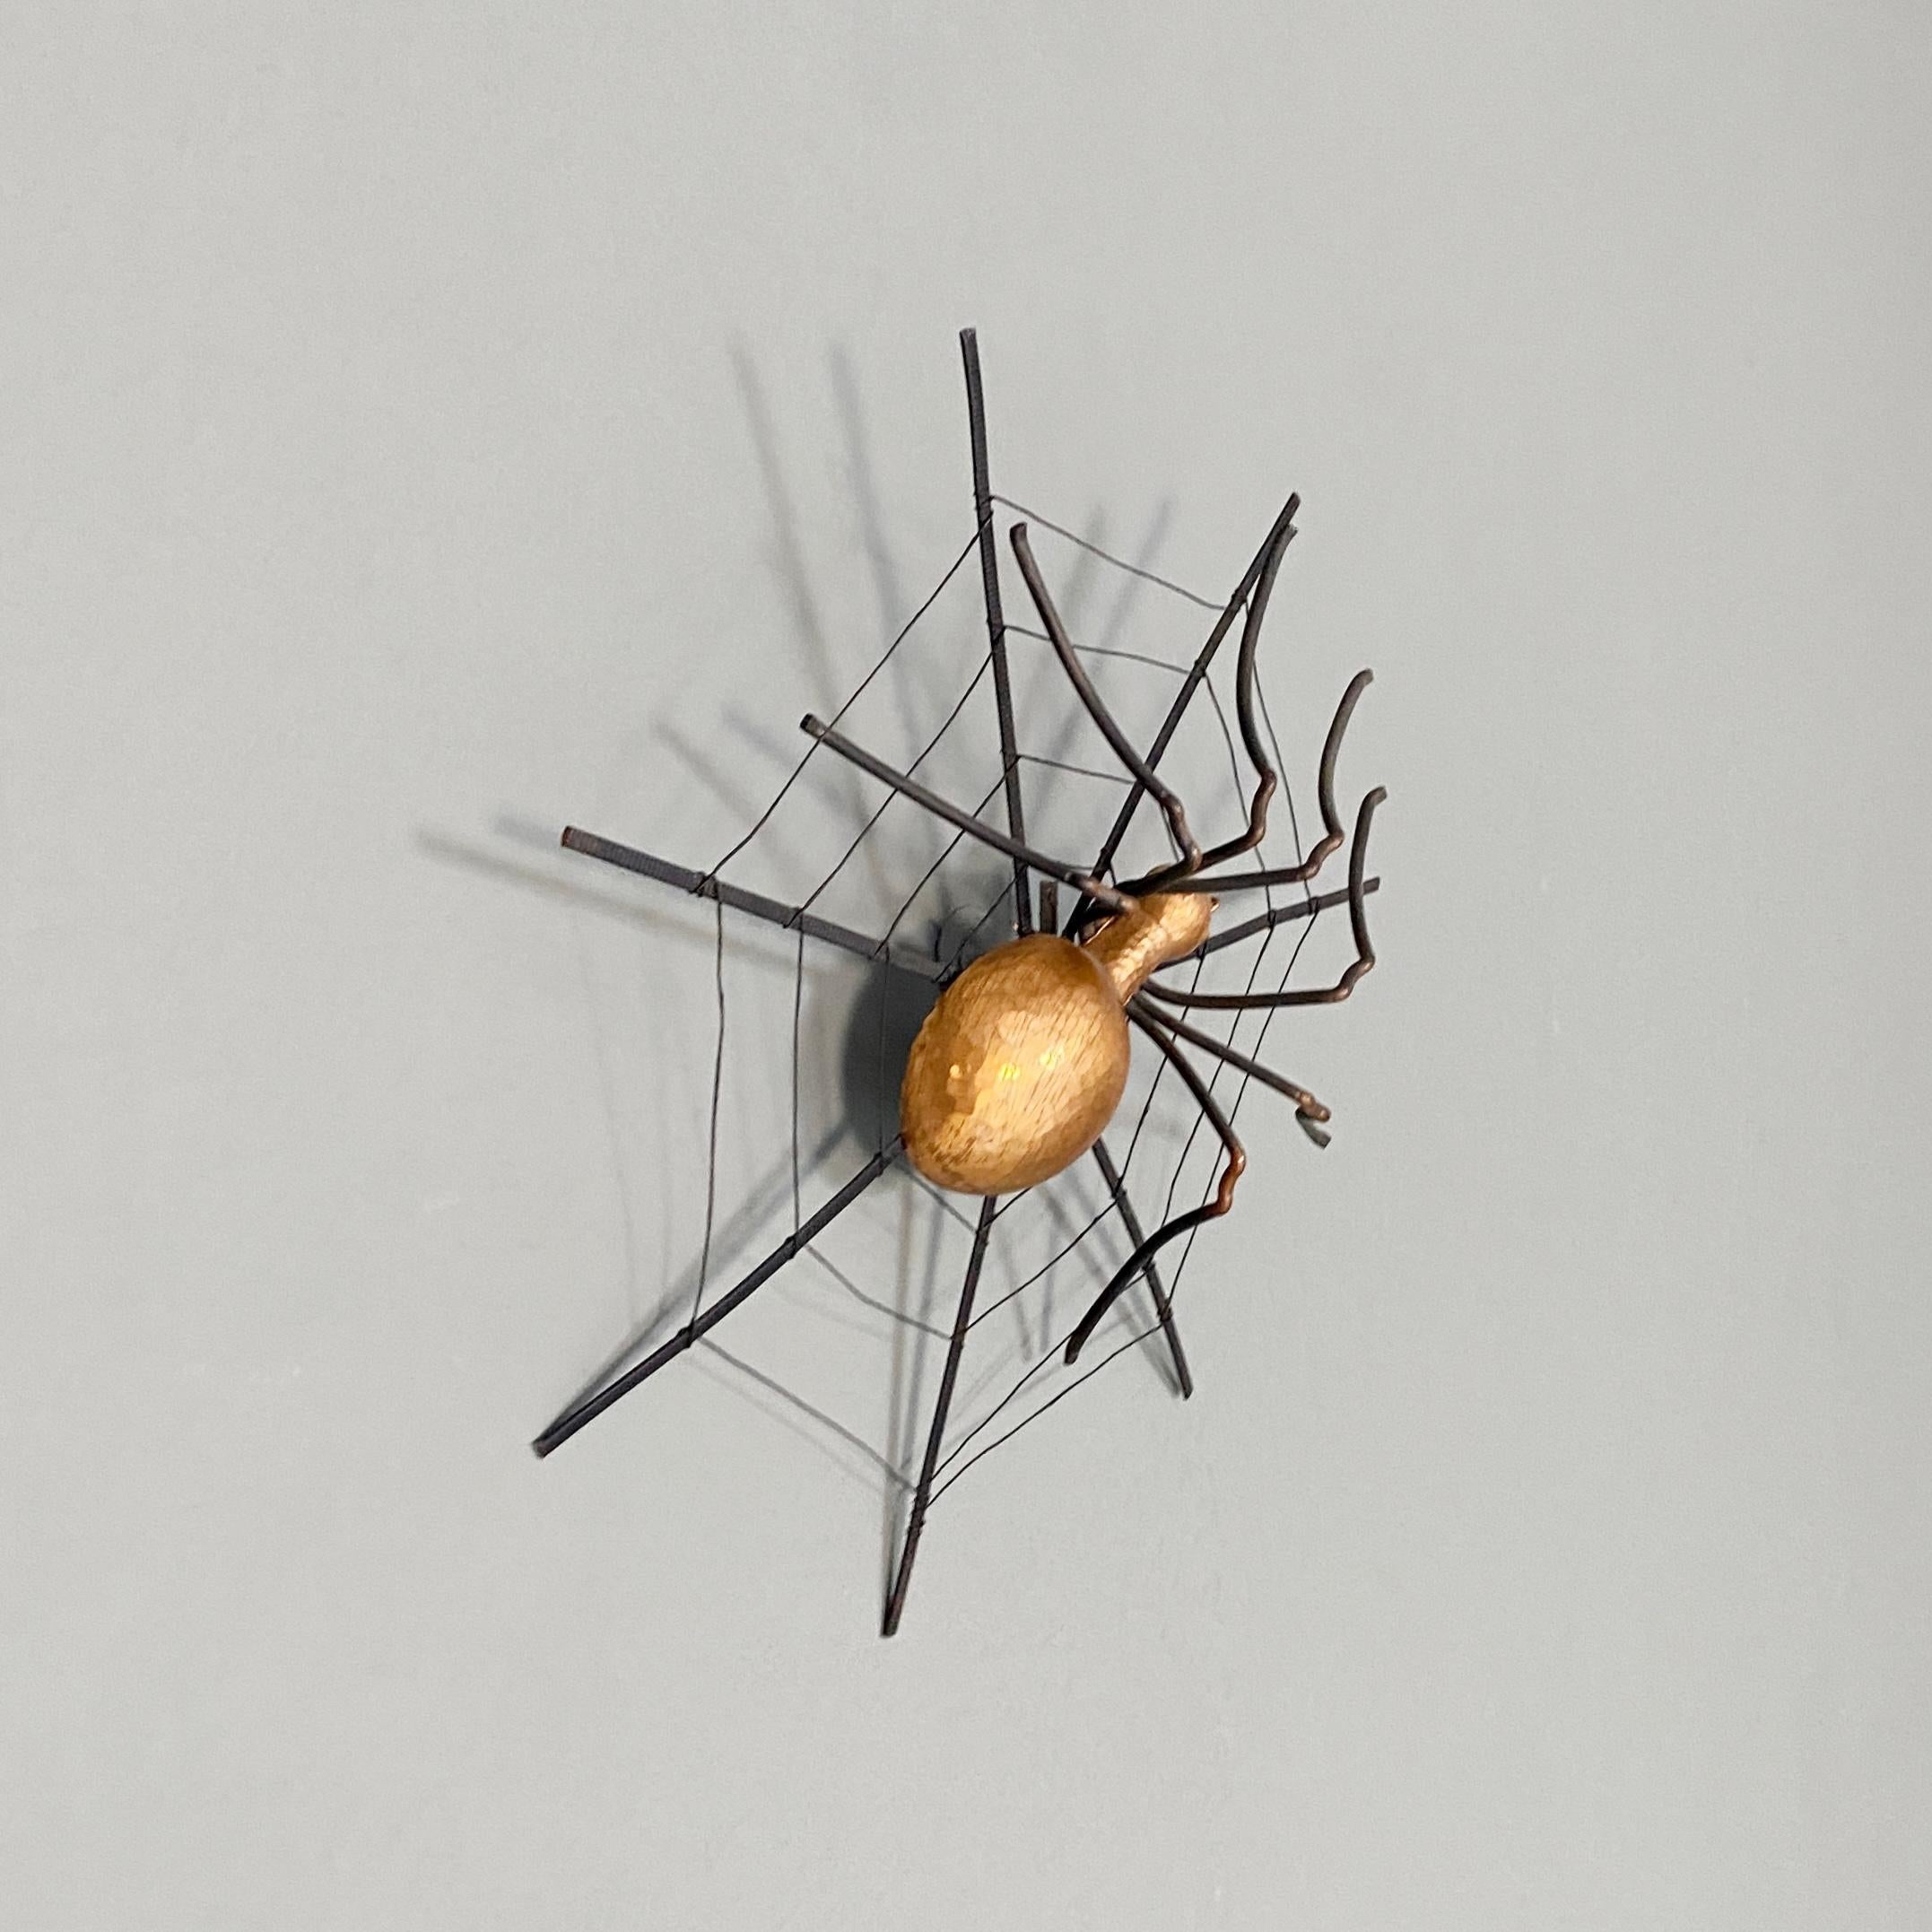 Italian Mid-Century Modern Spider-Shaped Wall Decoration, 1960s For Sale 2